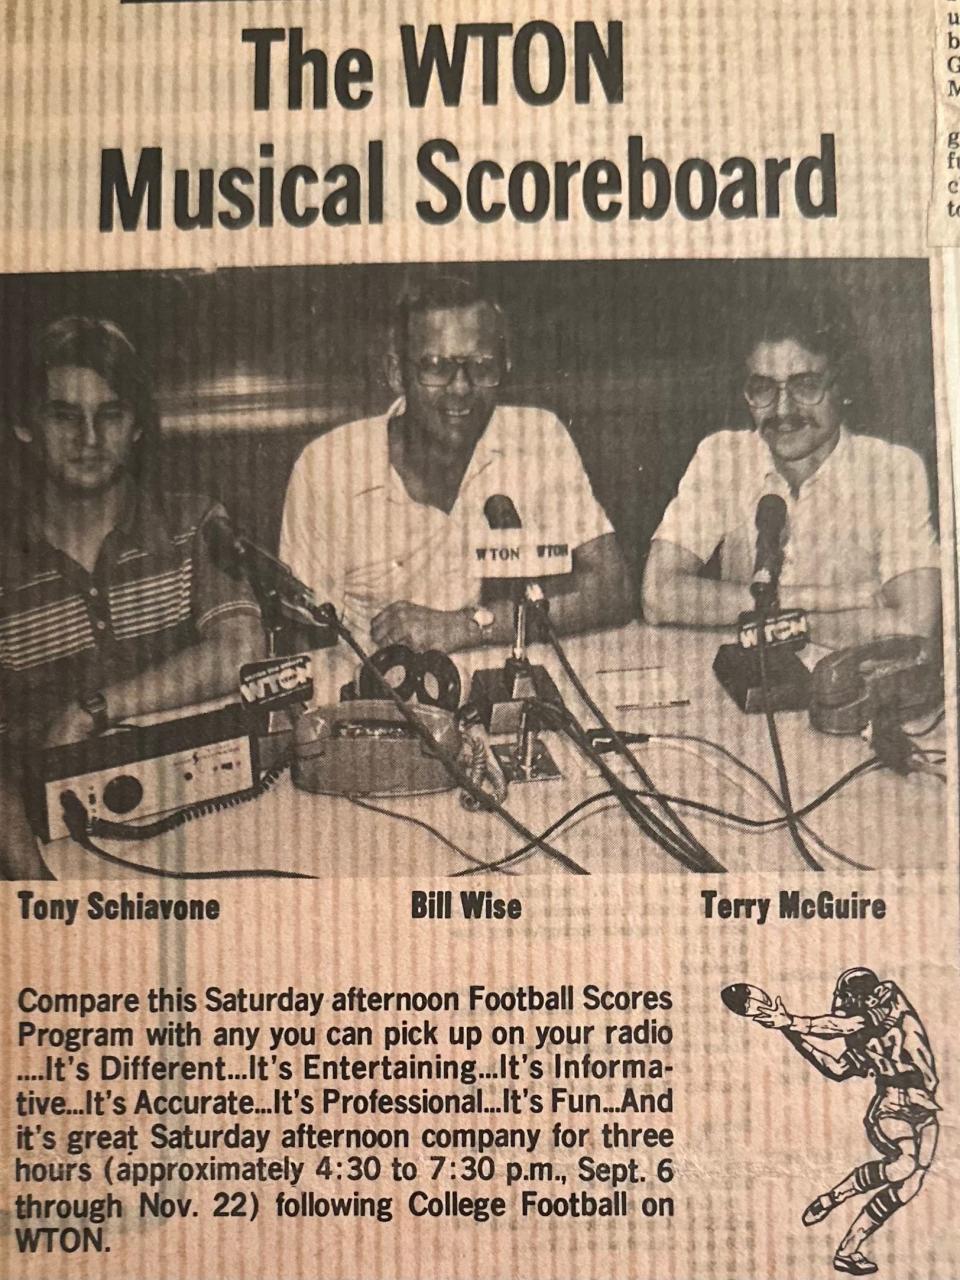 Tony Schiavone, Bill Wise and Terry McGuire hosted the Musical Scoreboard on Saturday afternoons on WTON.